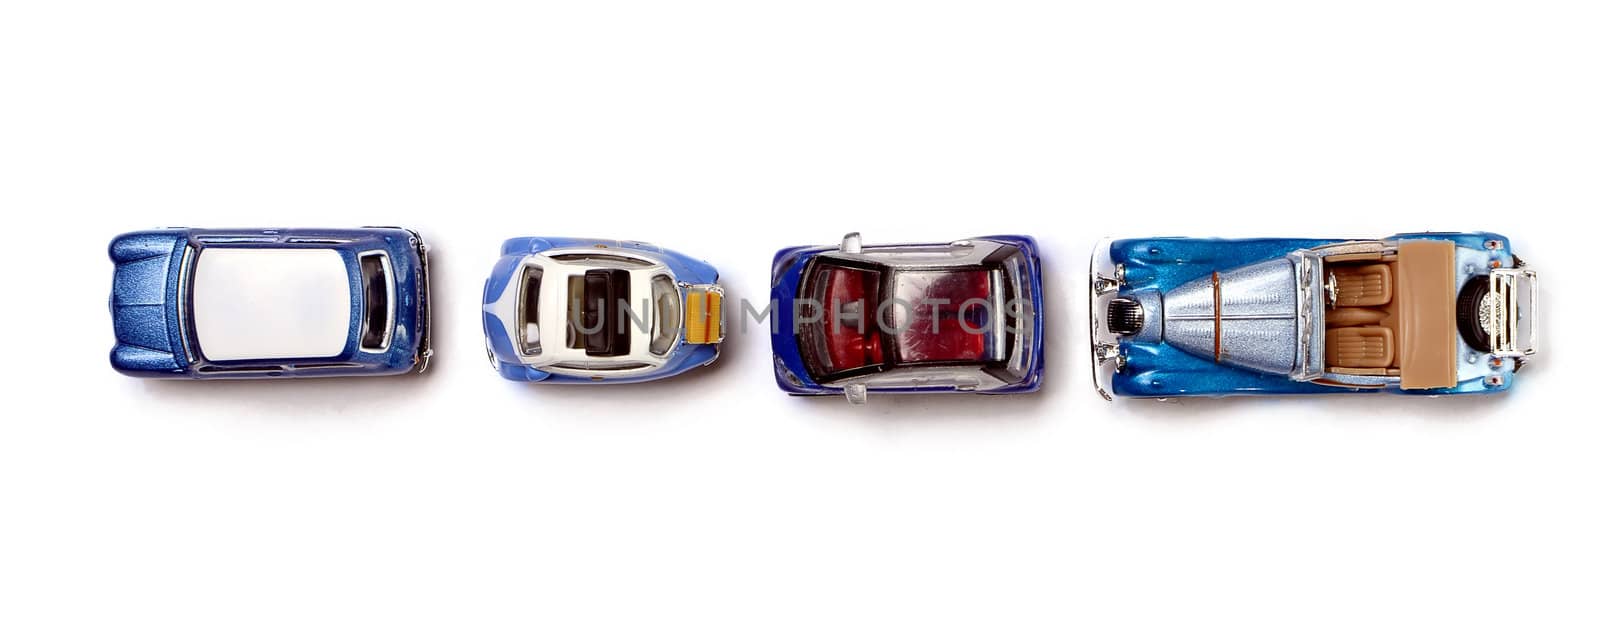 four miniature cars from the top isolated on white